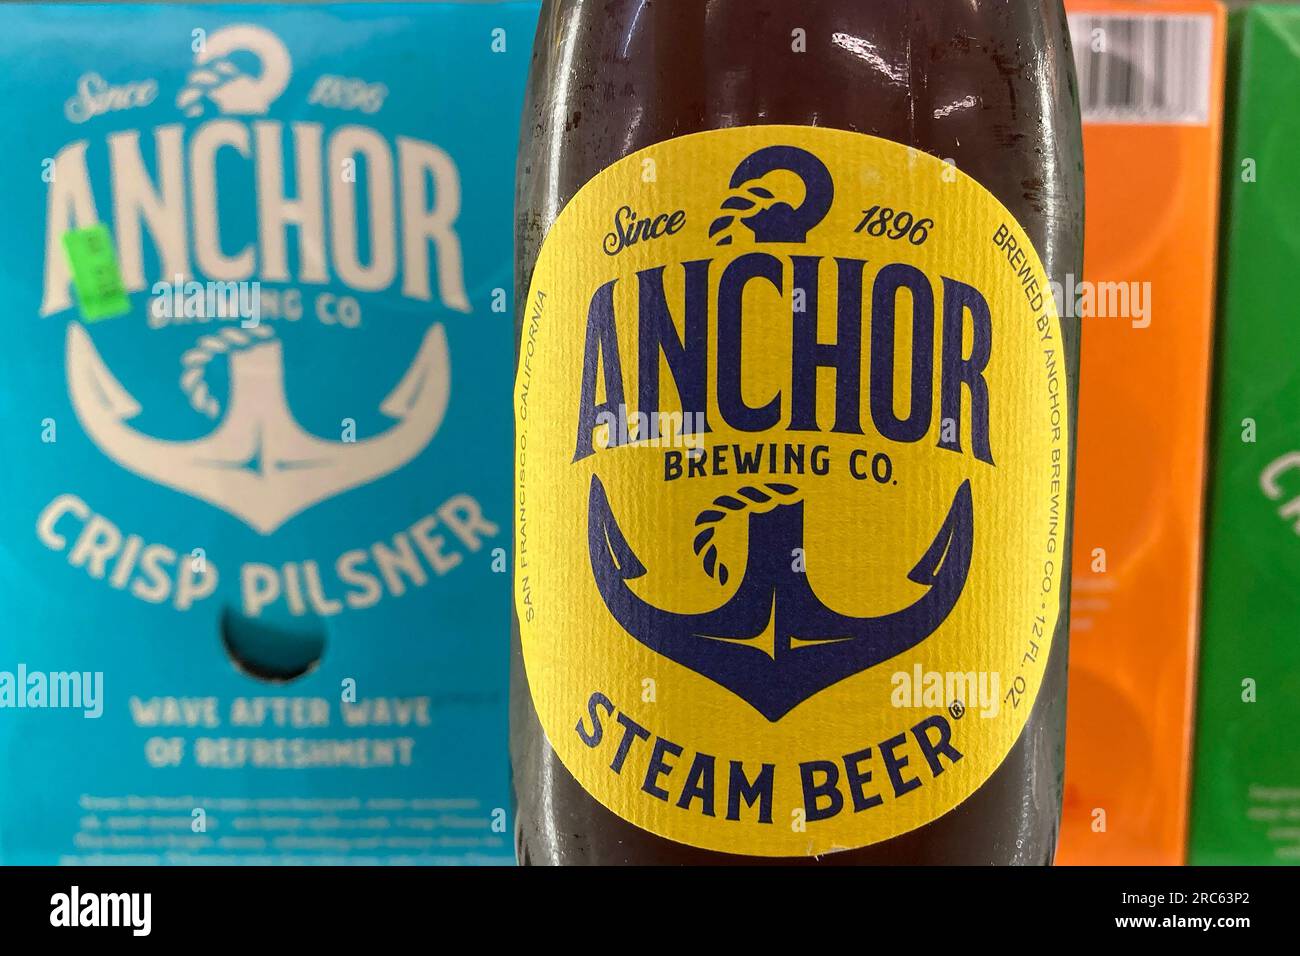 An Anchor Brewing Co. steam beer is photographed at a store in San